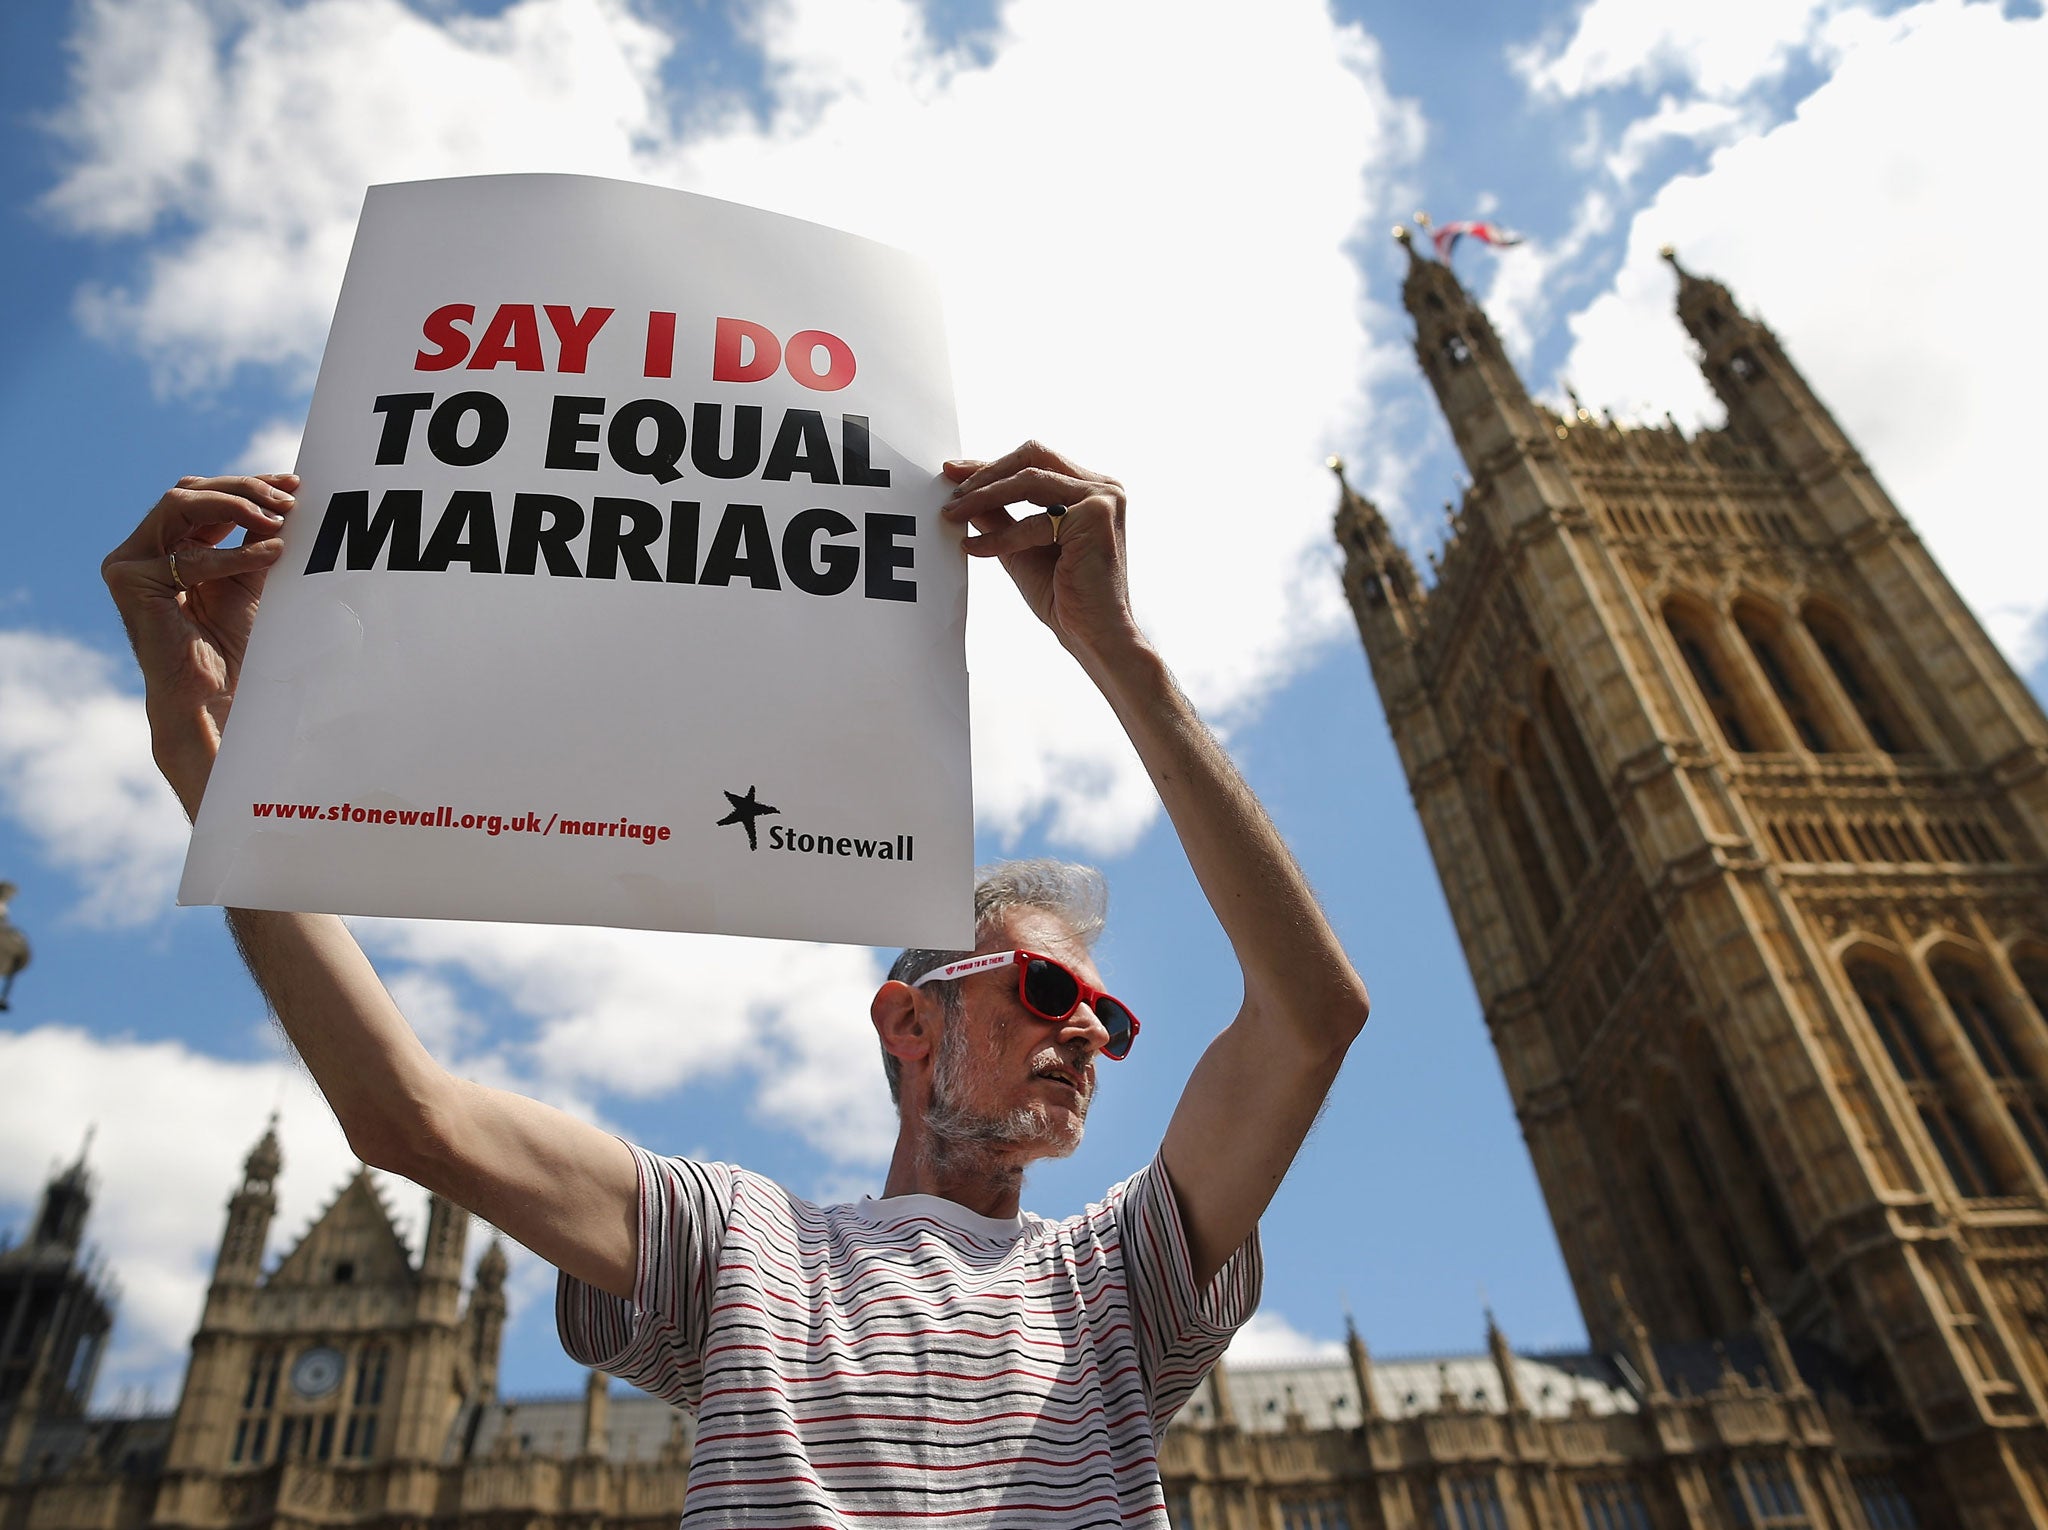 Not all gay people are good at art, as this criminally drab sign demonstrates: A proponent of same sex marriage protest outside the Houses of Parliament on June 3, 2013 in London, England.